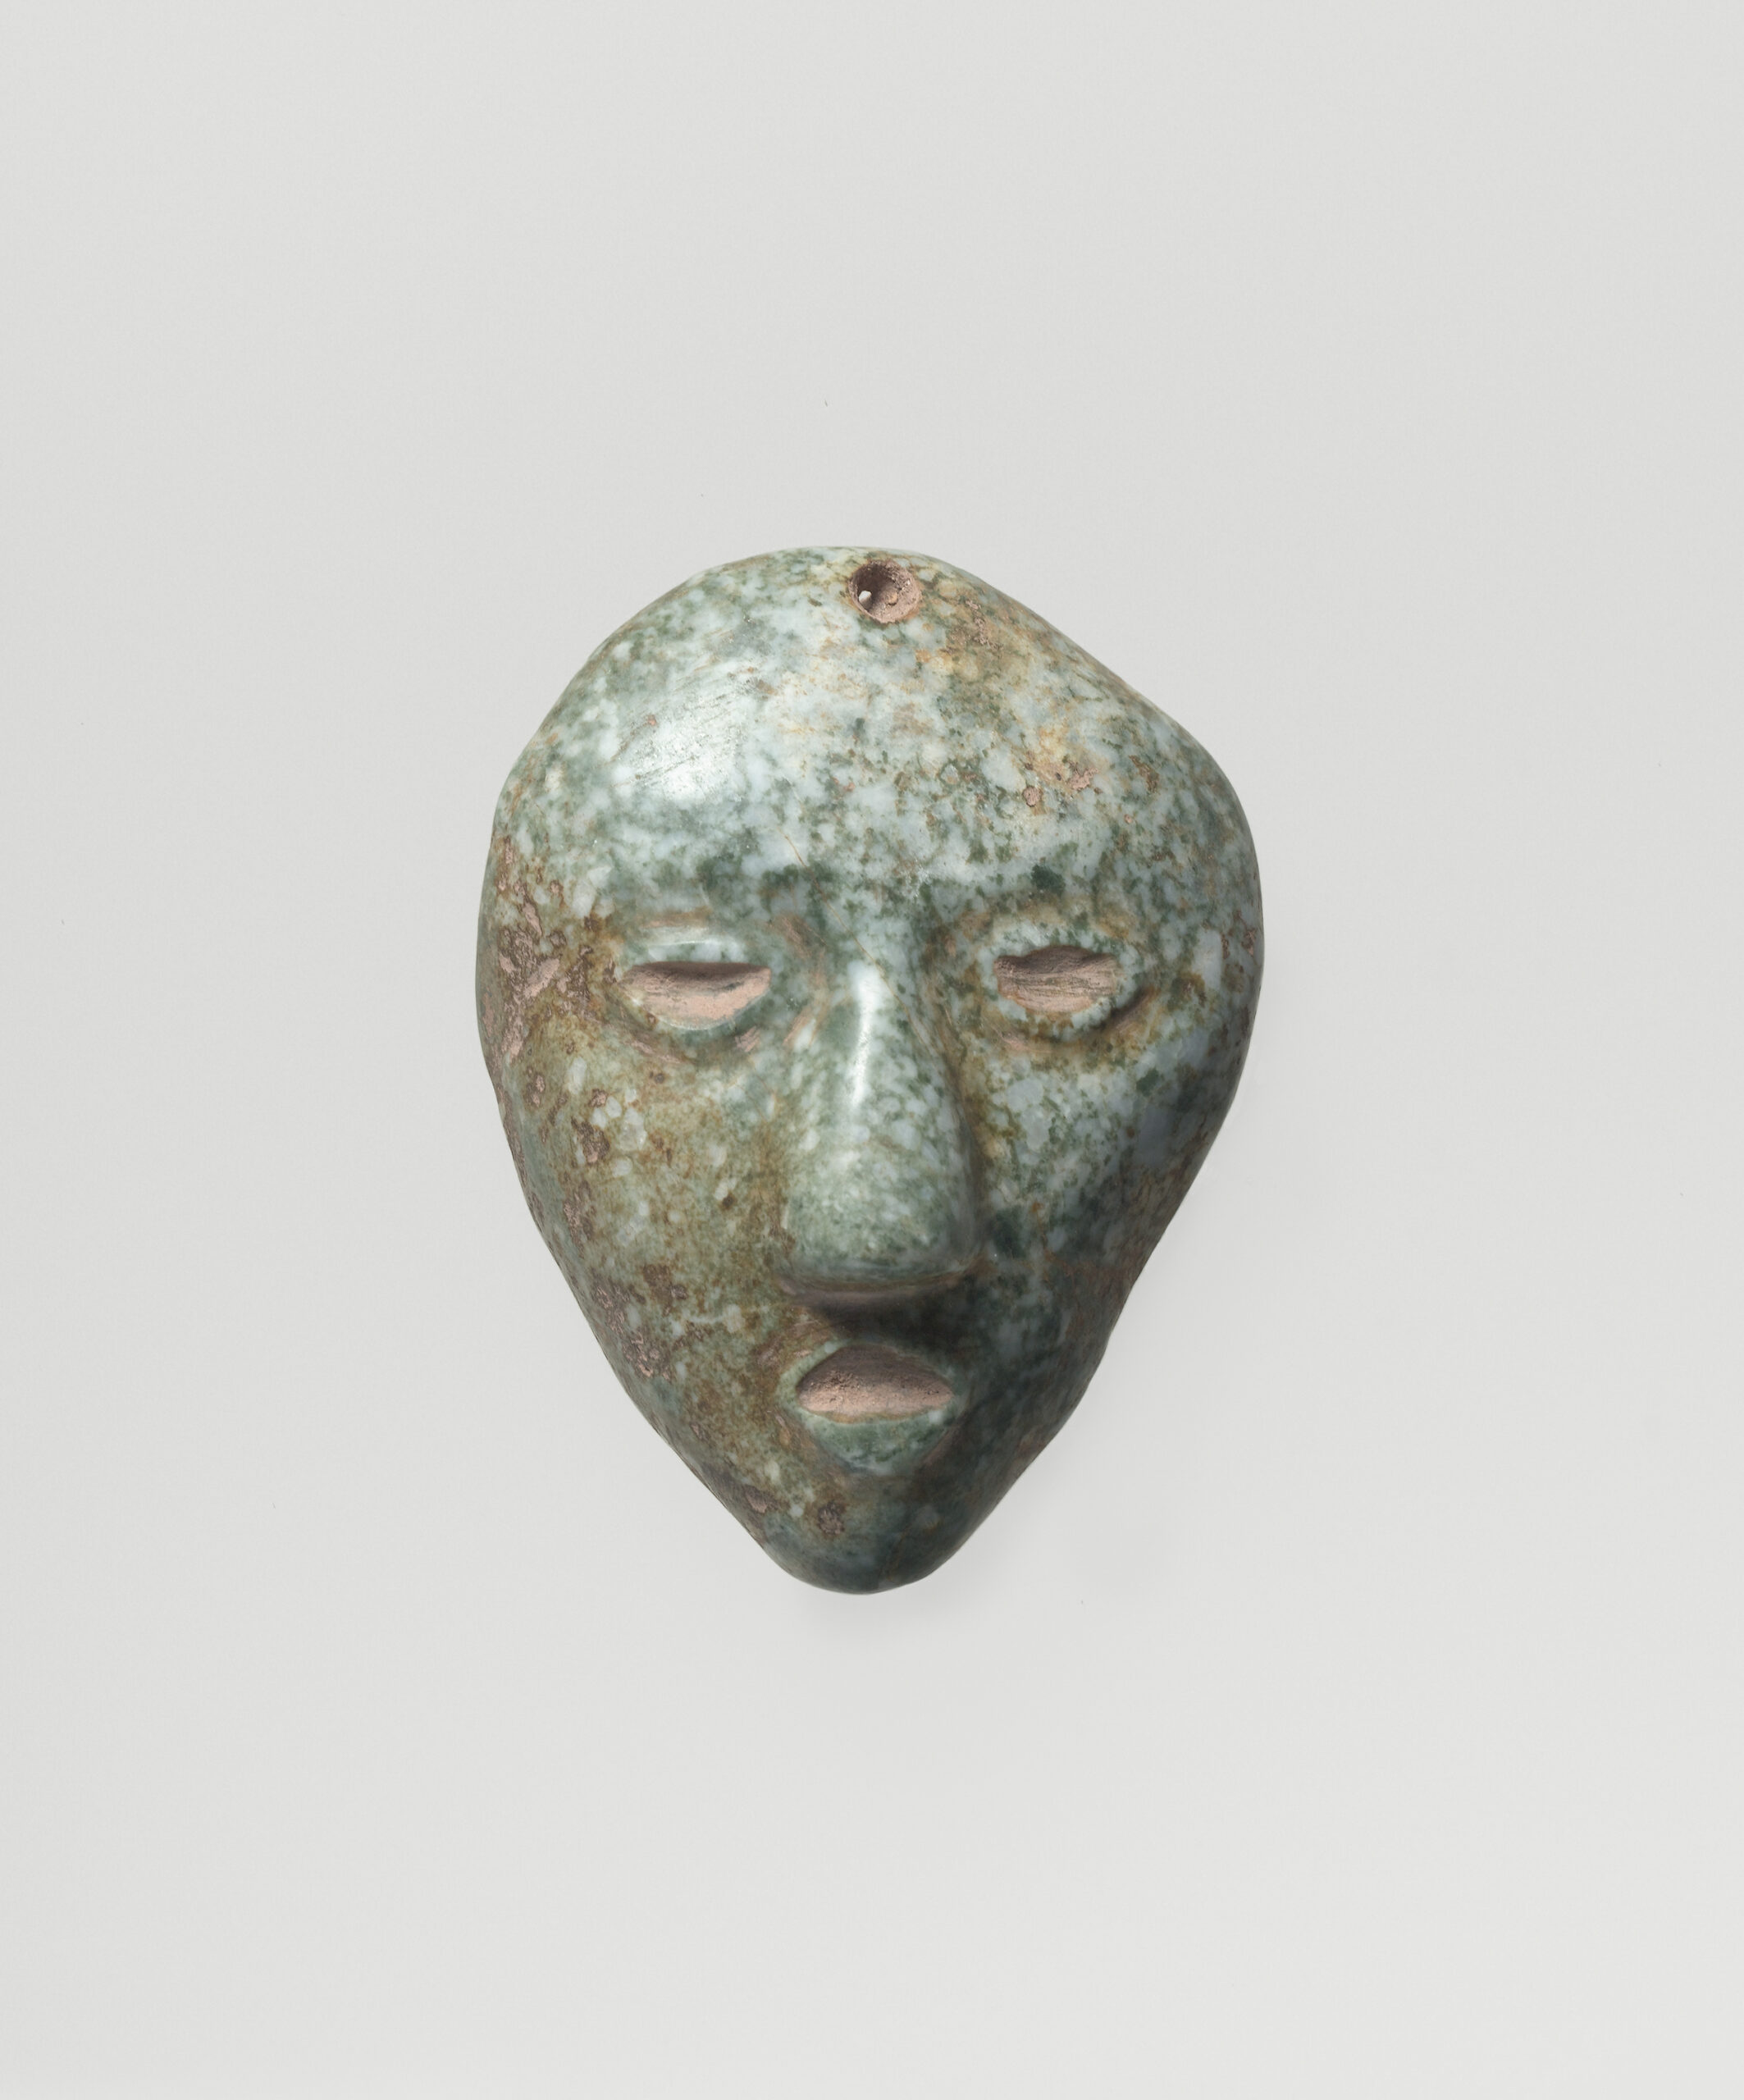 Small stone pendant of a head with an open mouth and large nose.